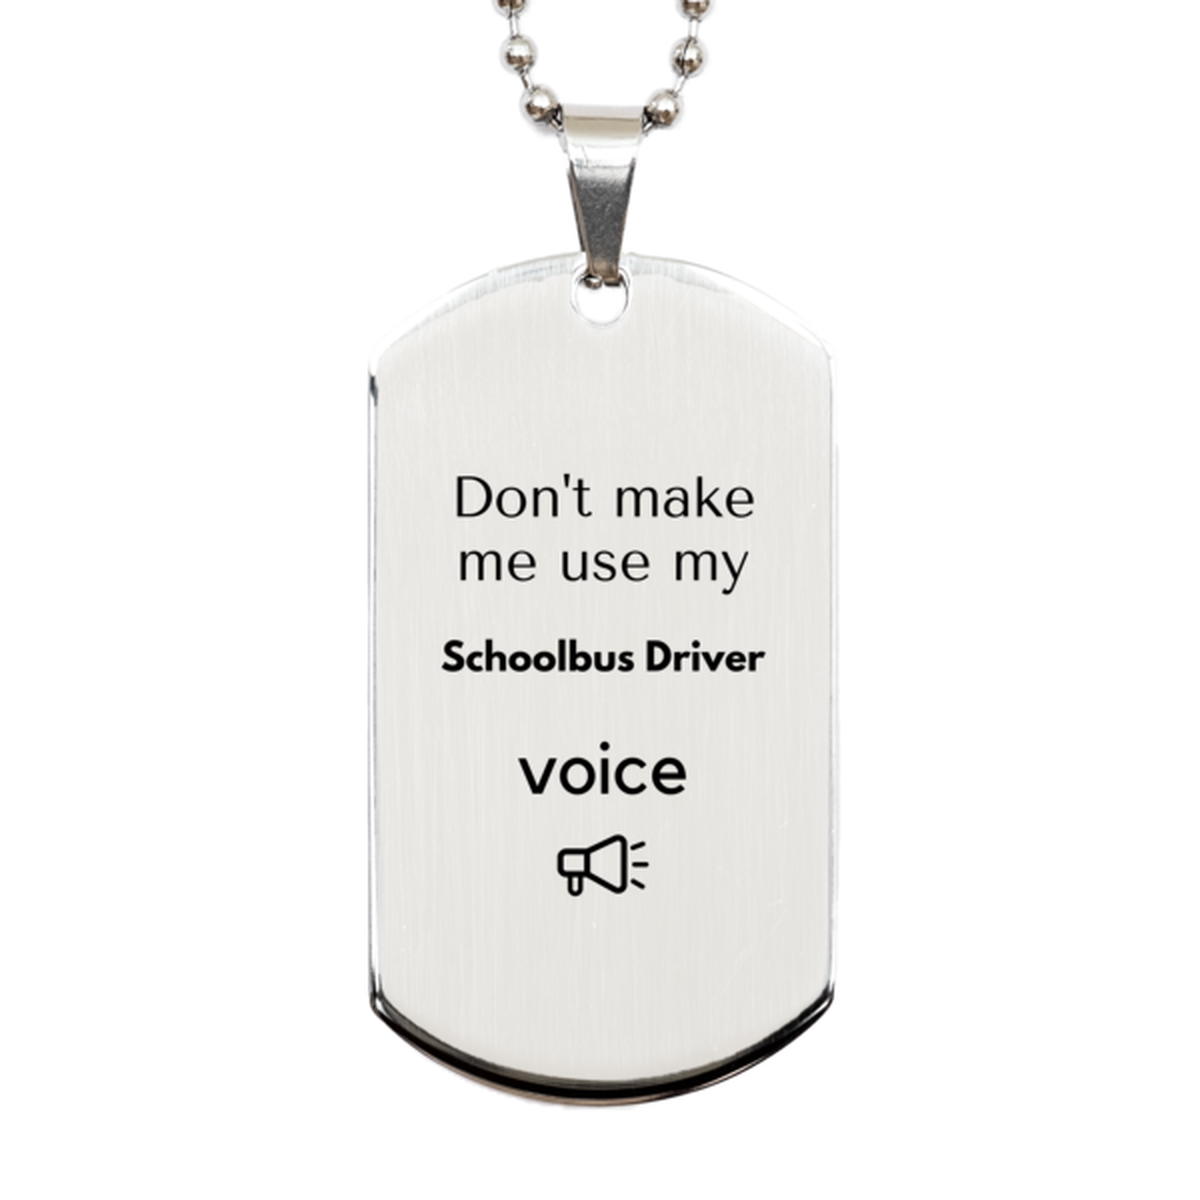 Don't make me use my Schoolbus Driver voice, Sarcasm Schoolbus Driver Gifts, Christmas Schoolbus Driver Silver Dog Tag Birthday Unique Gifts For Schoolbus Driver Coworkers, Men, Women, Colleague, Friends